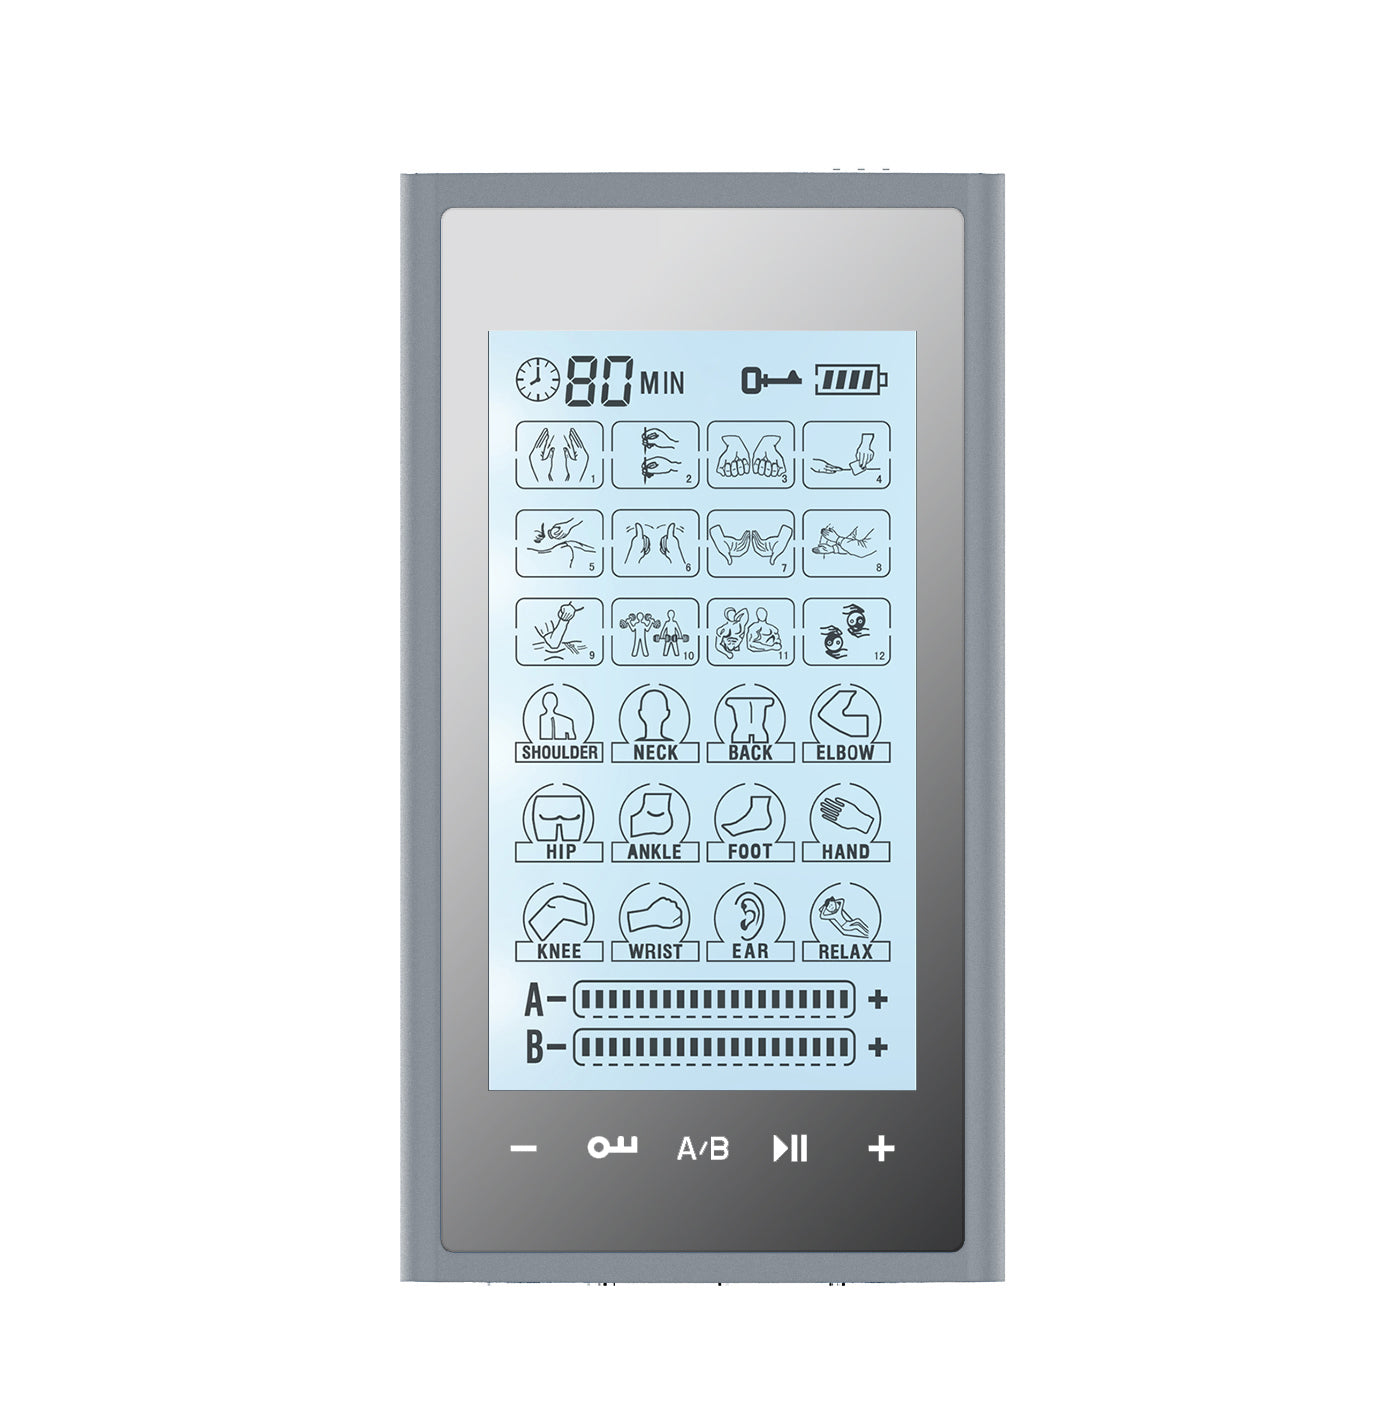 Deluxe Tens Unit Muscle Stimulator EHE010 Backlit LCD Display Soft